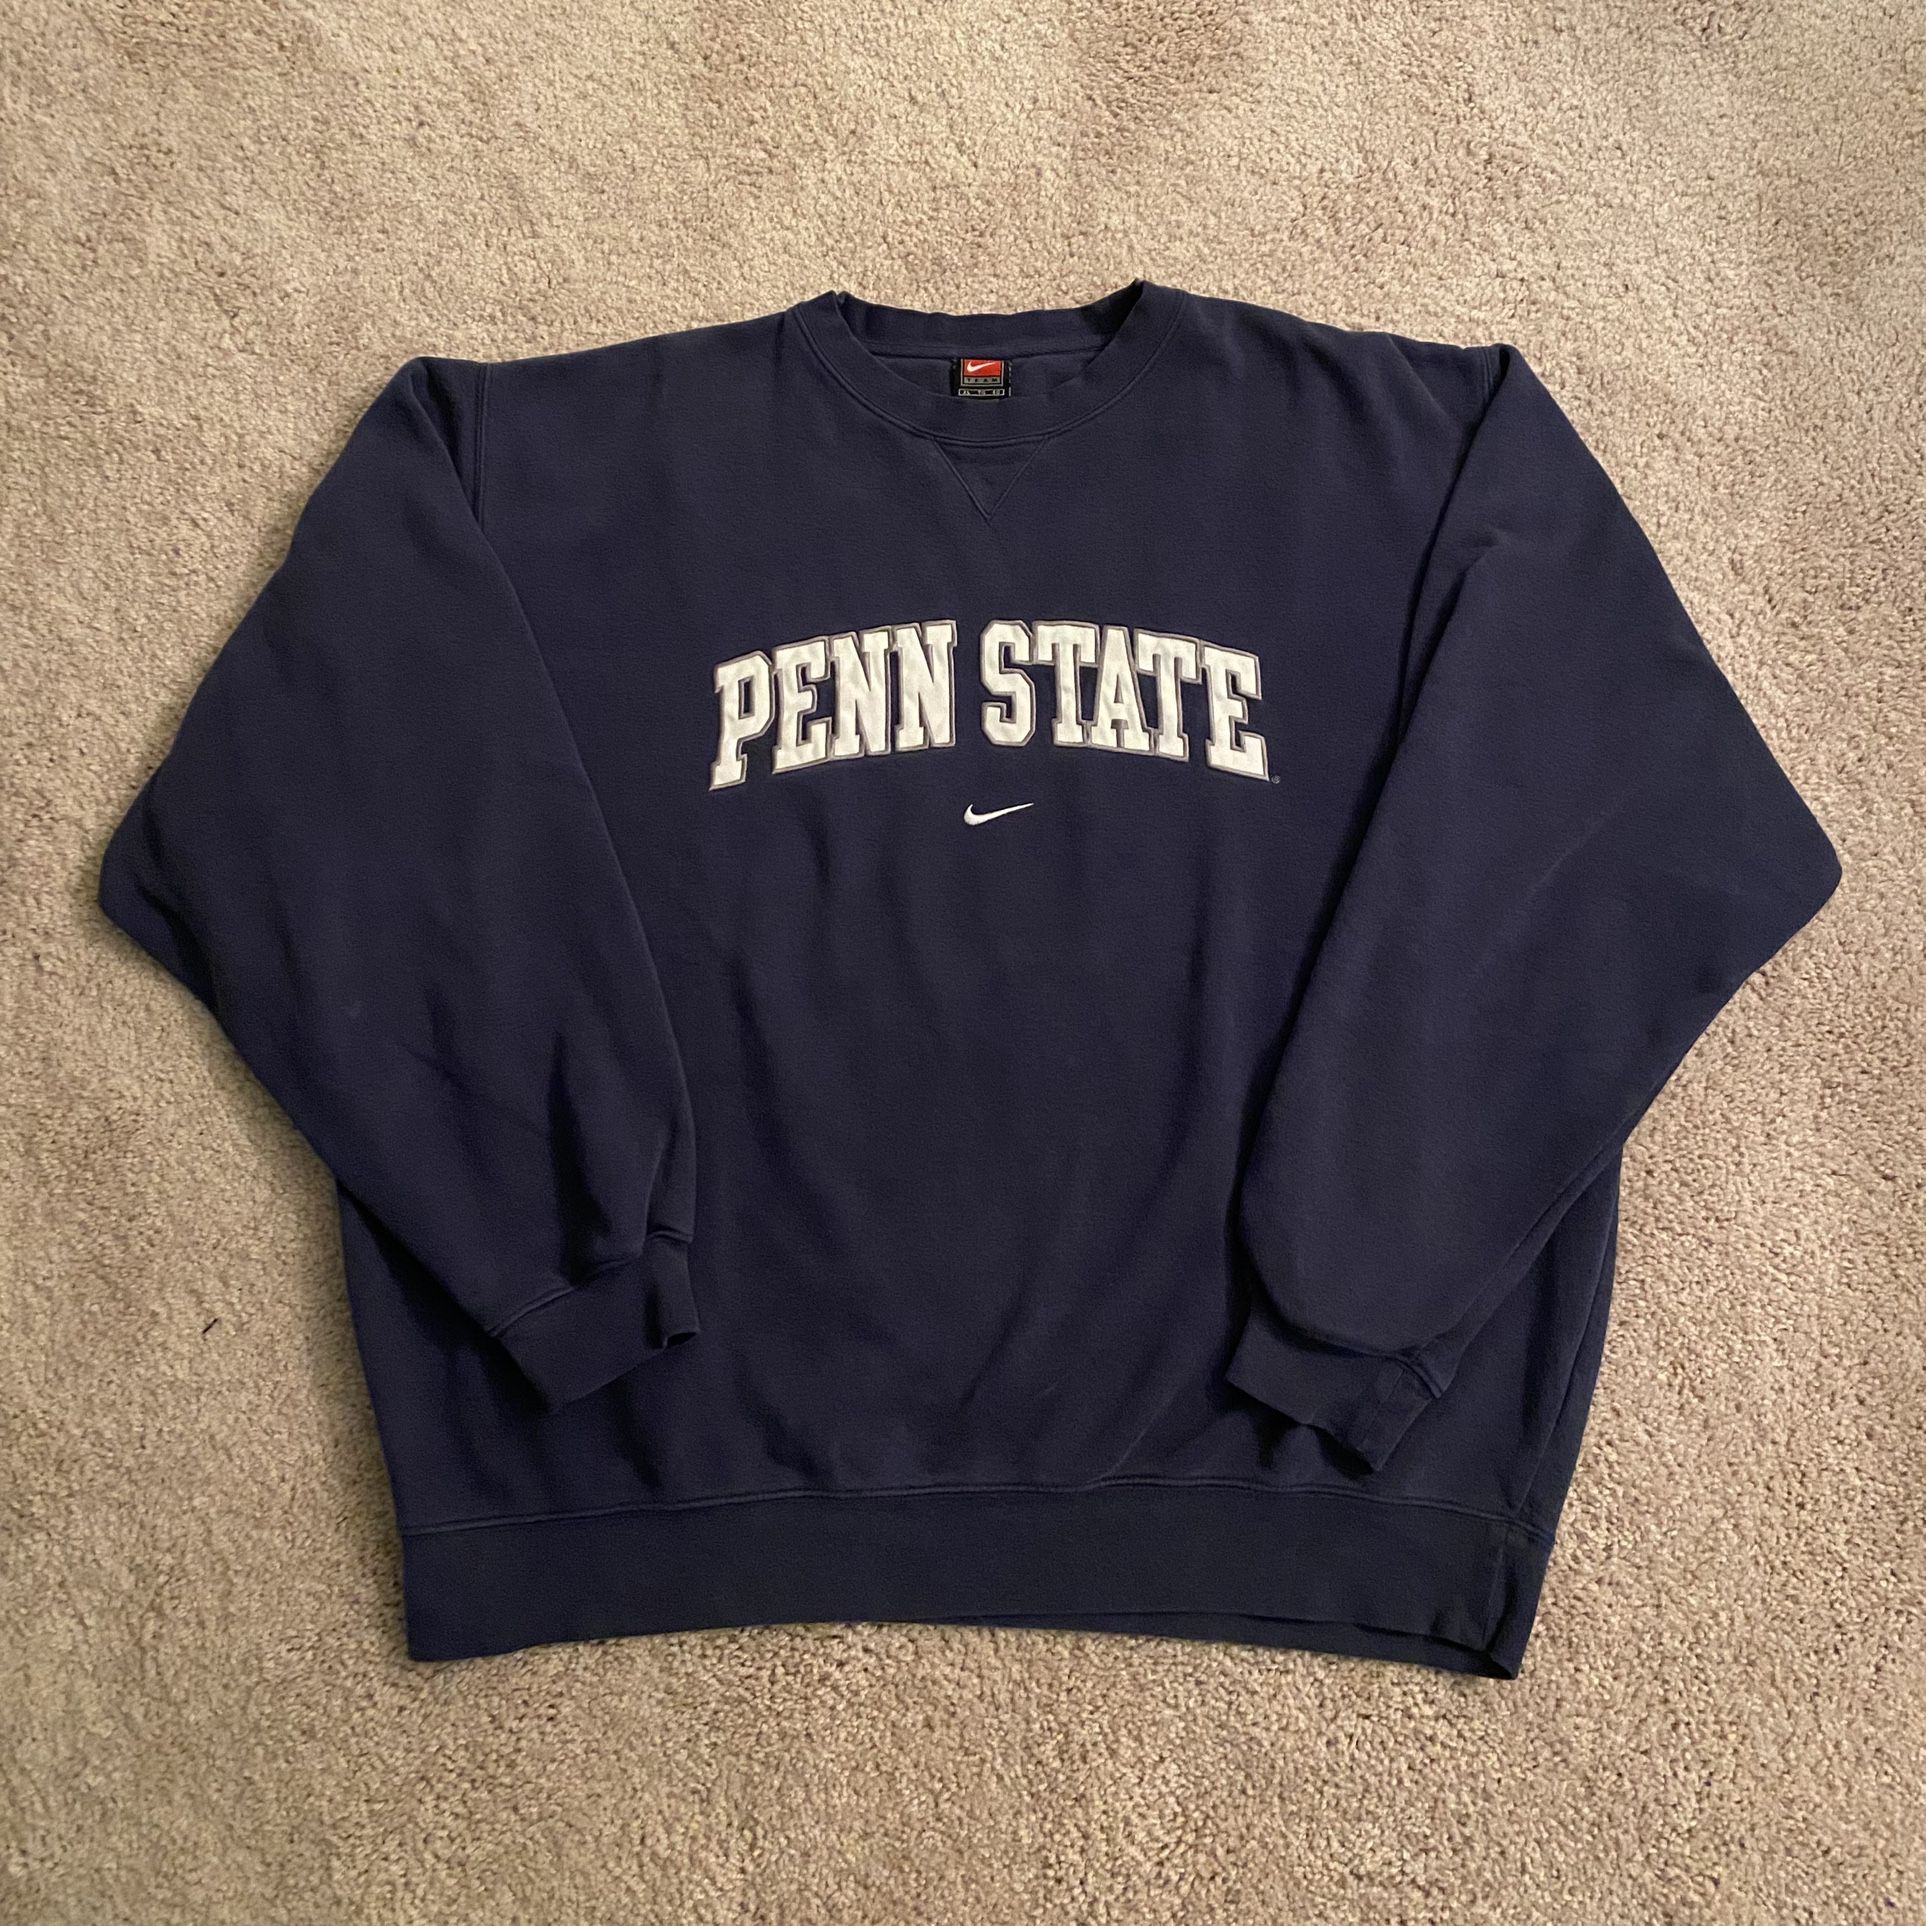 Pen State Middle Swoosh sweater